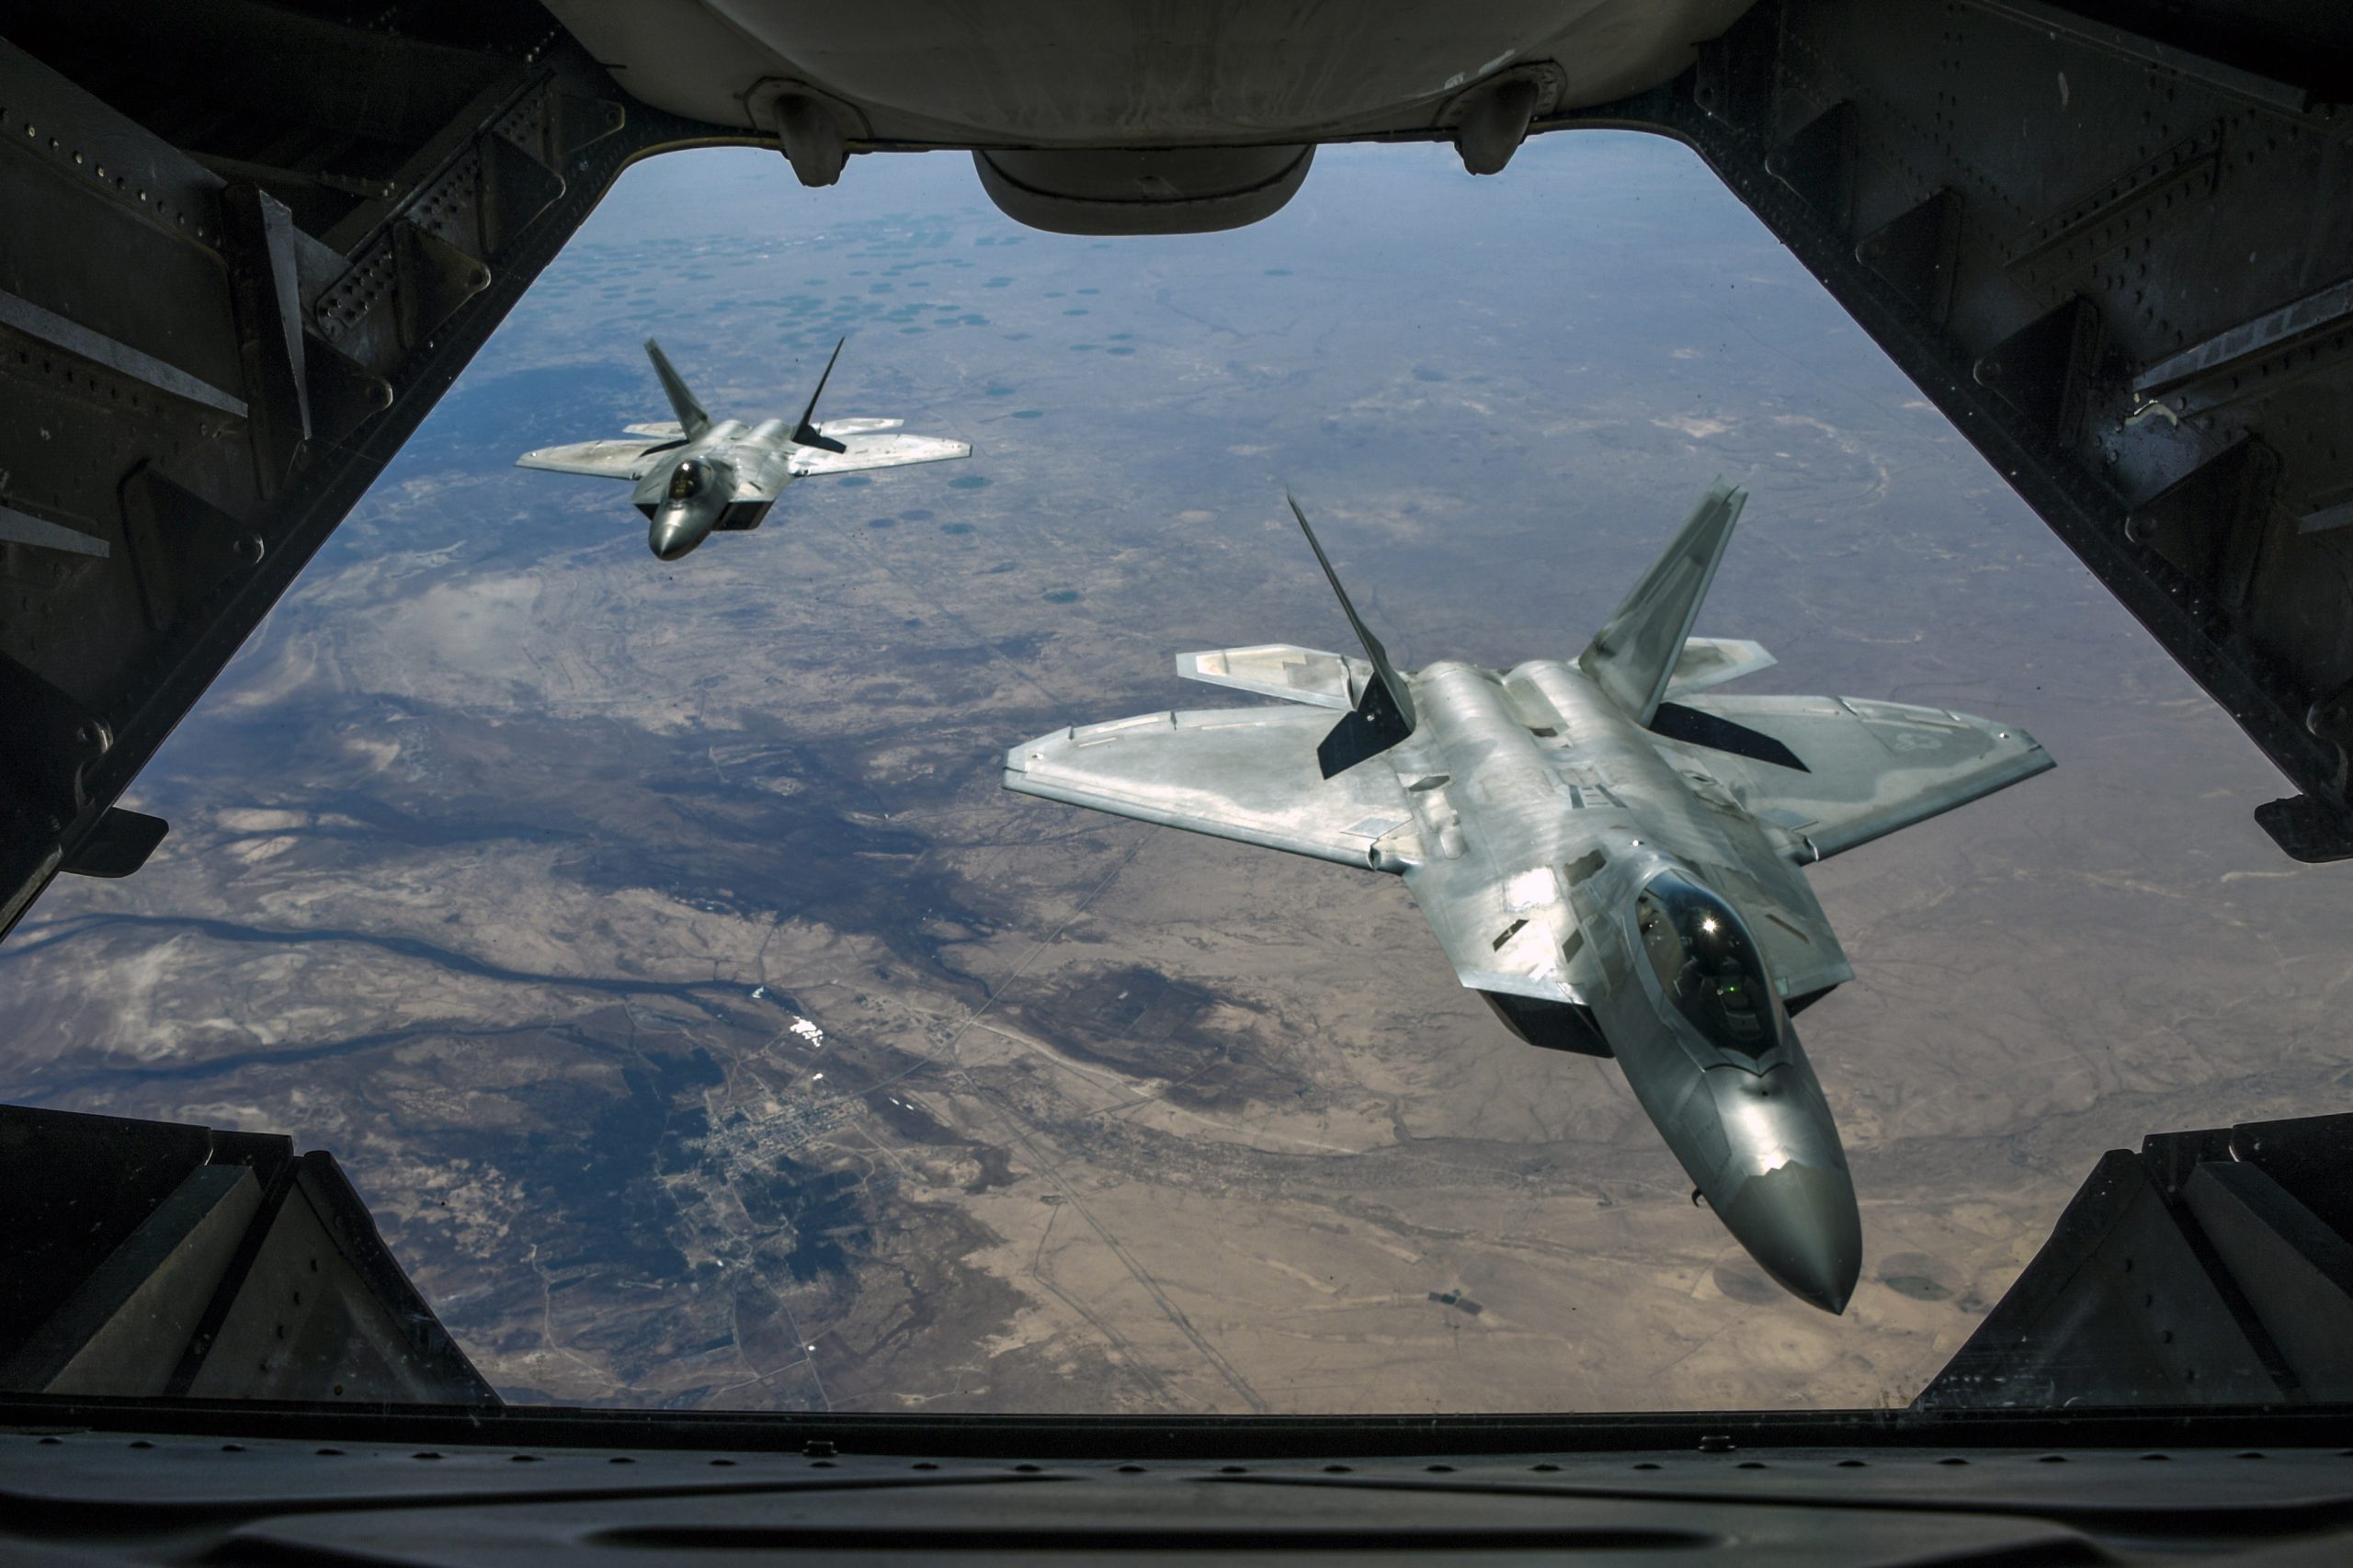 Two fighter jets, viewed from an opening in a third aircraft in front of them, fly over brownish terrain.